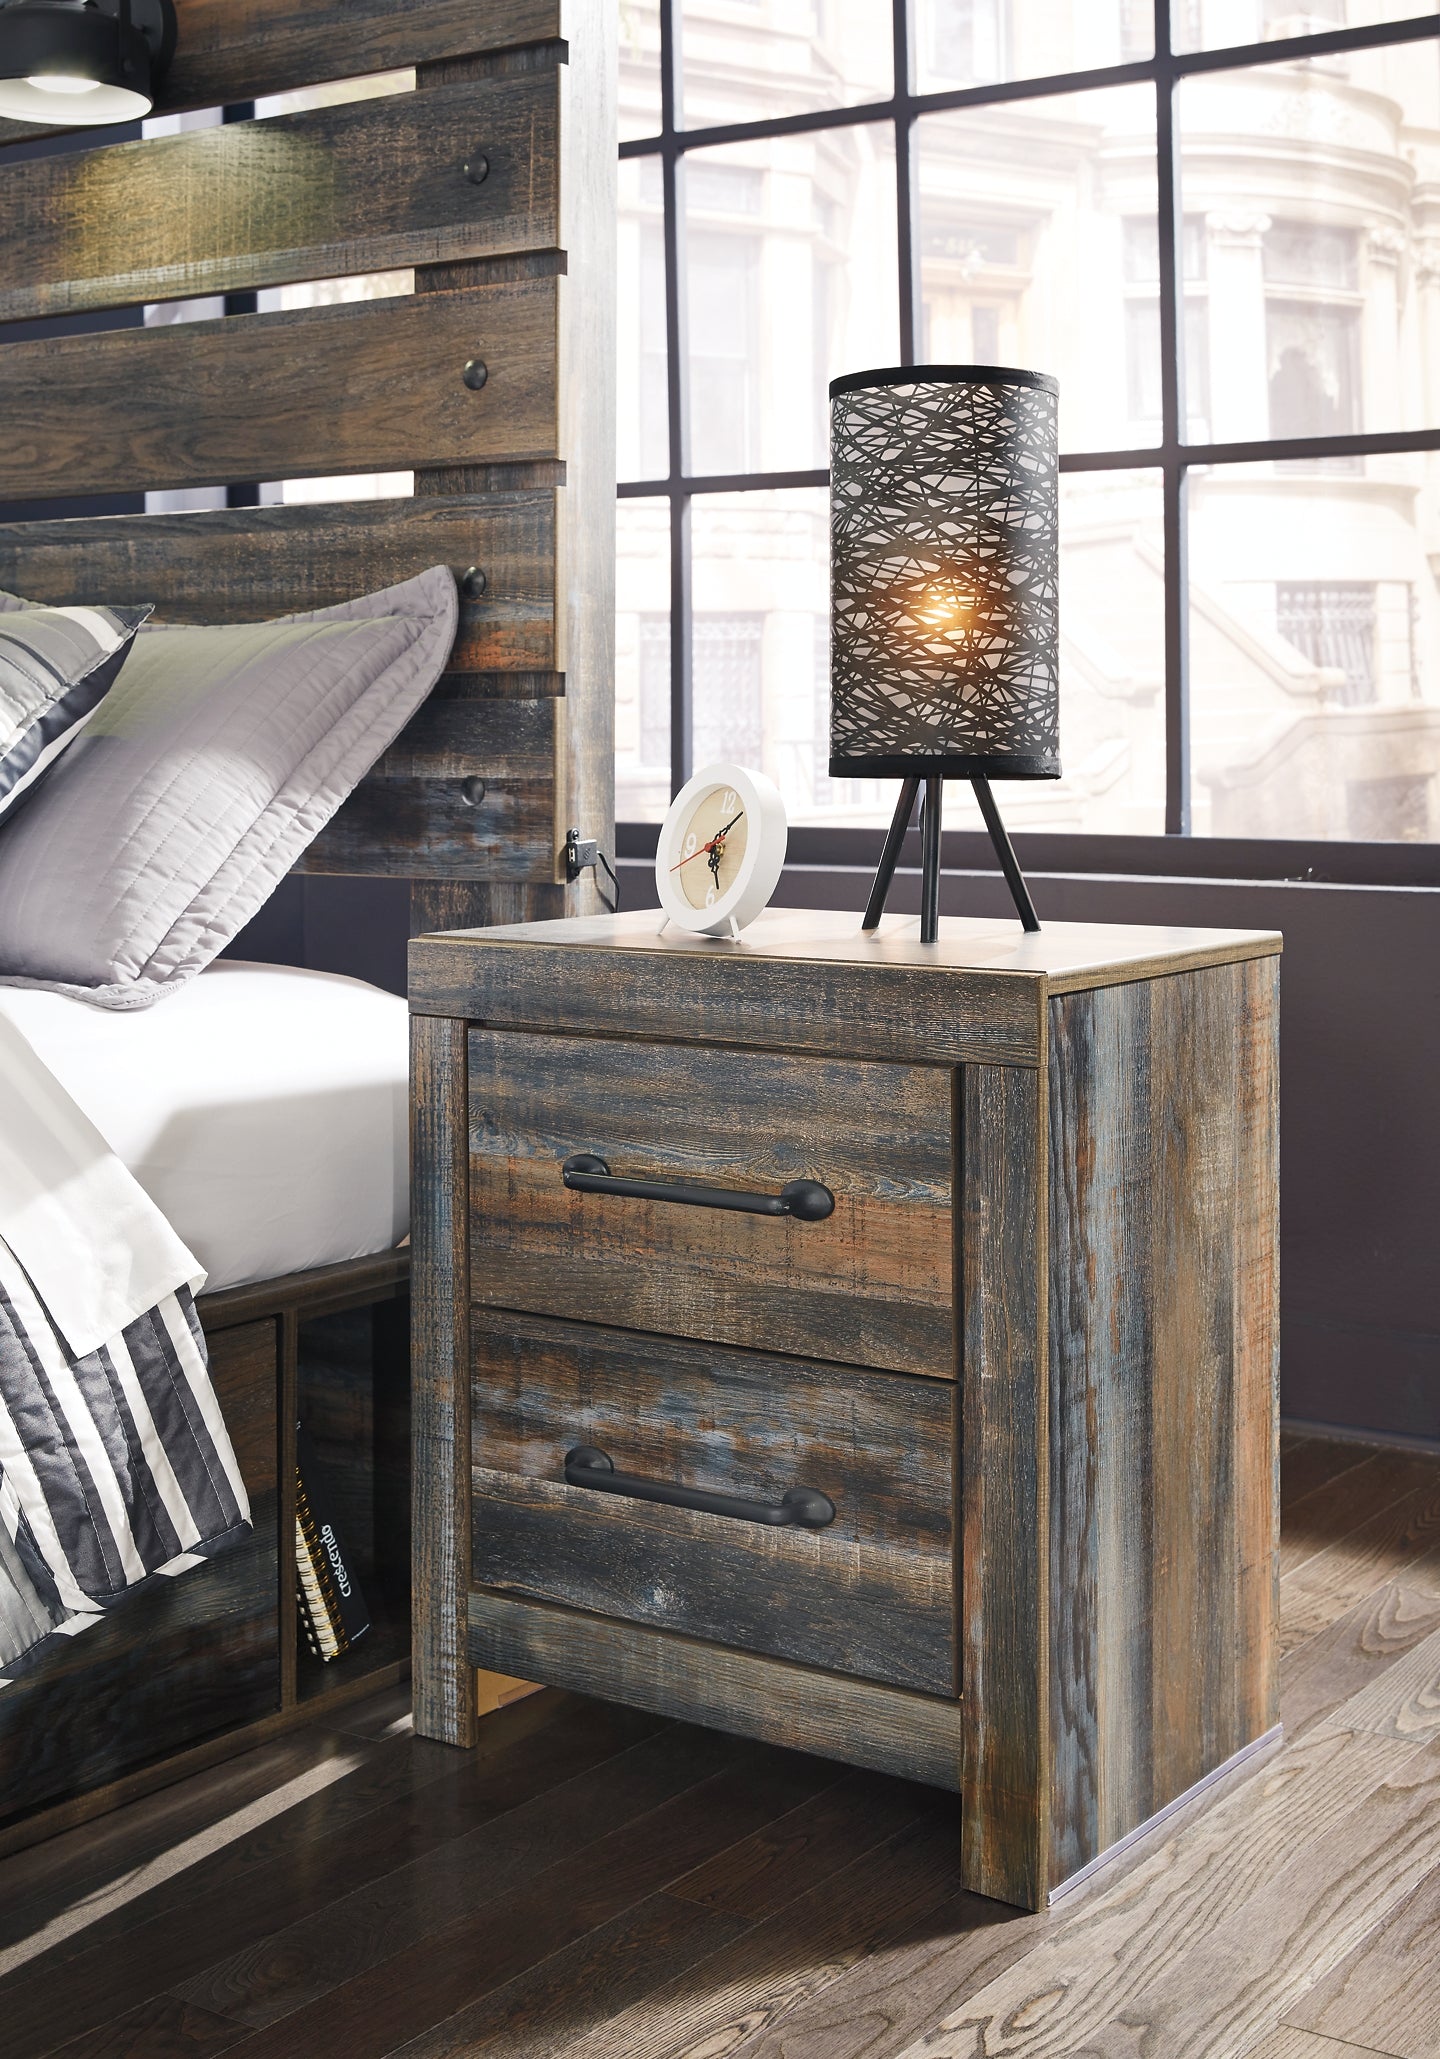 Drystan Twin Panel Headboard with Mirrored Dresser and 2 Nightstands Signature Design by Ashley®